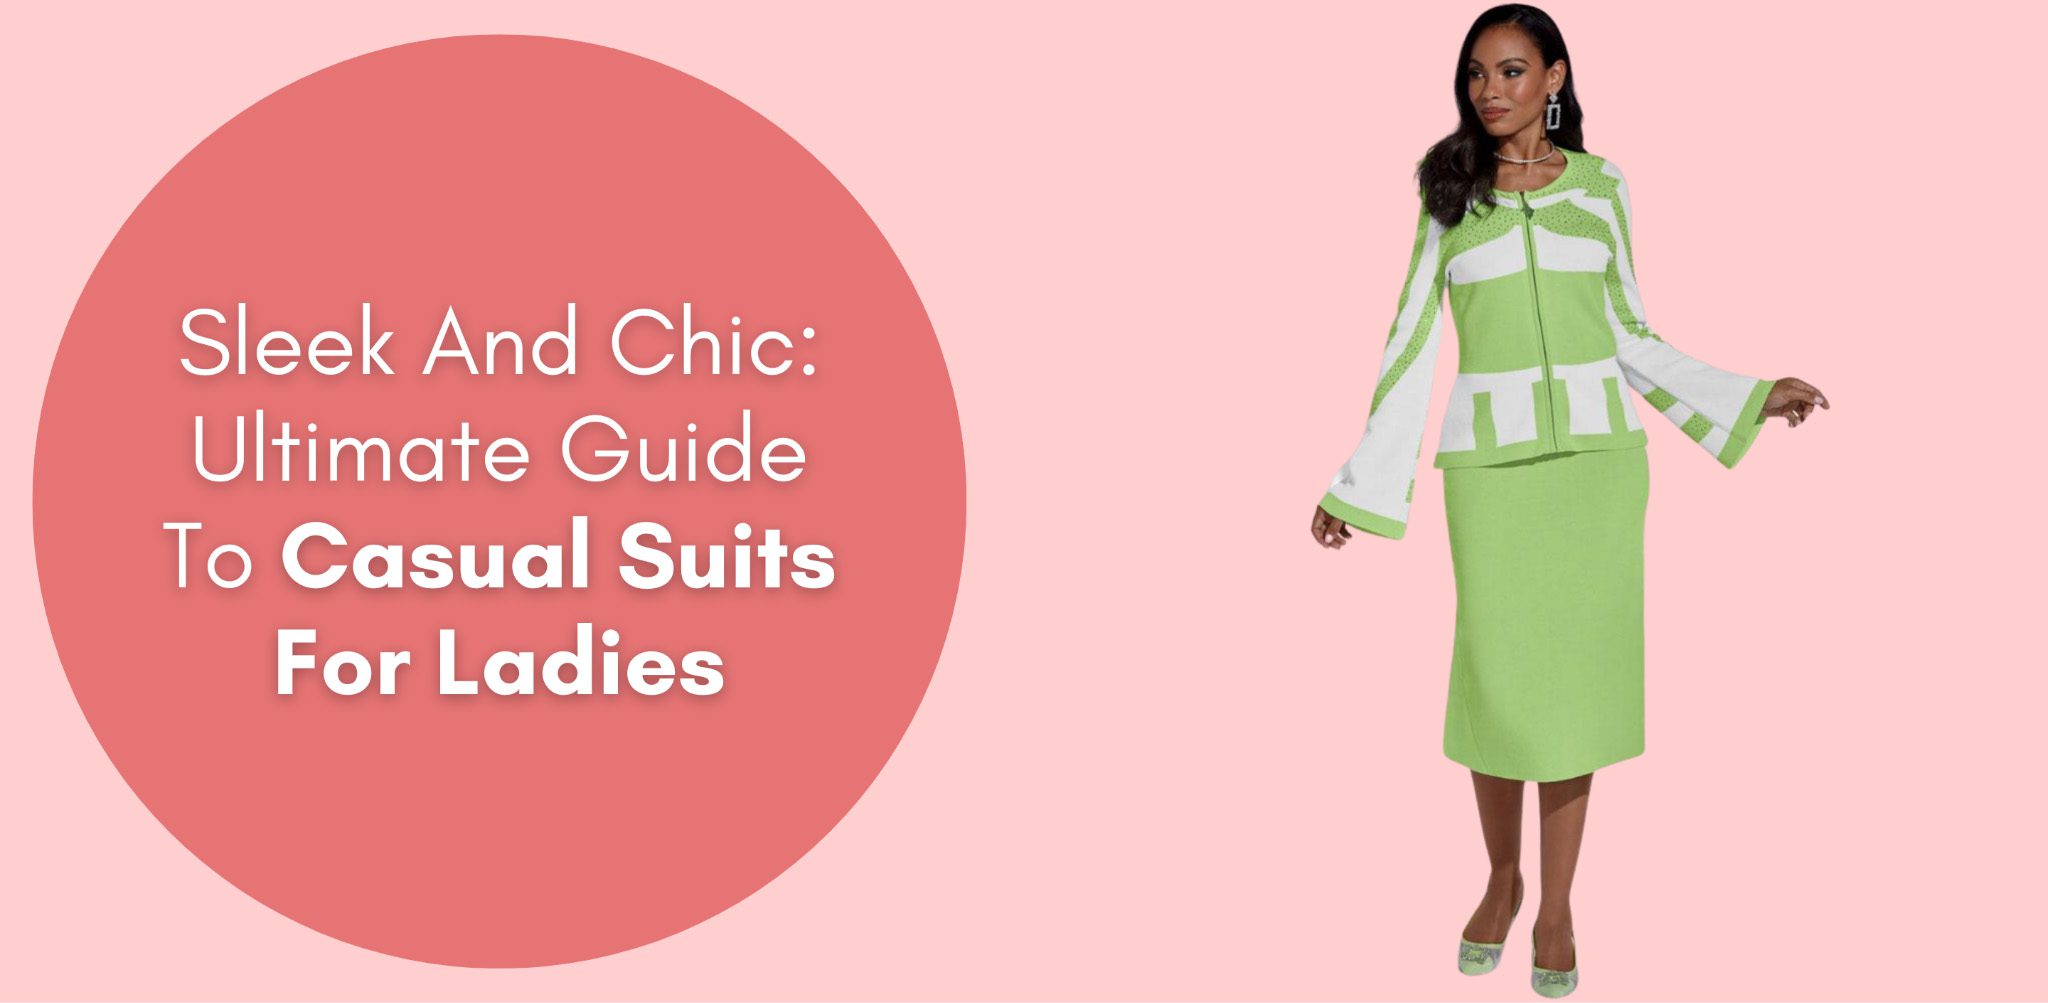 Sleek And Chic: Ultimate Guide To Casual Suits For Ladies